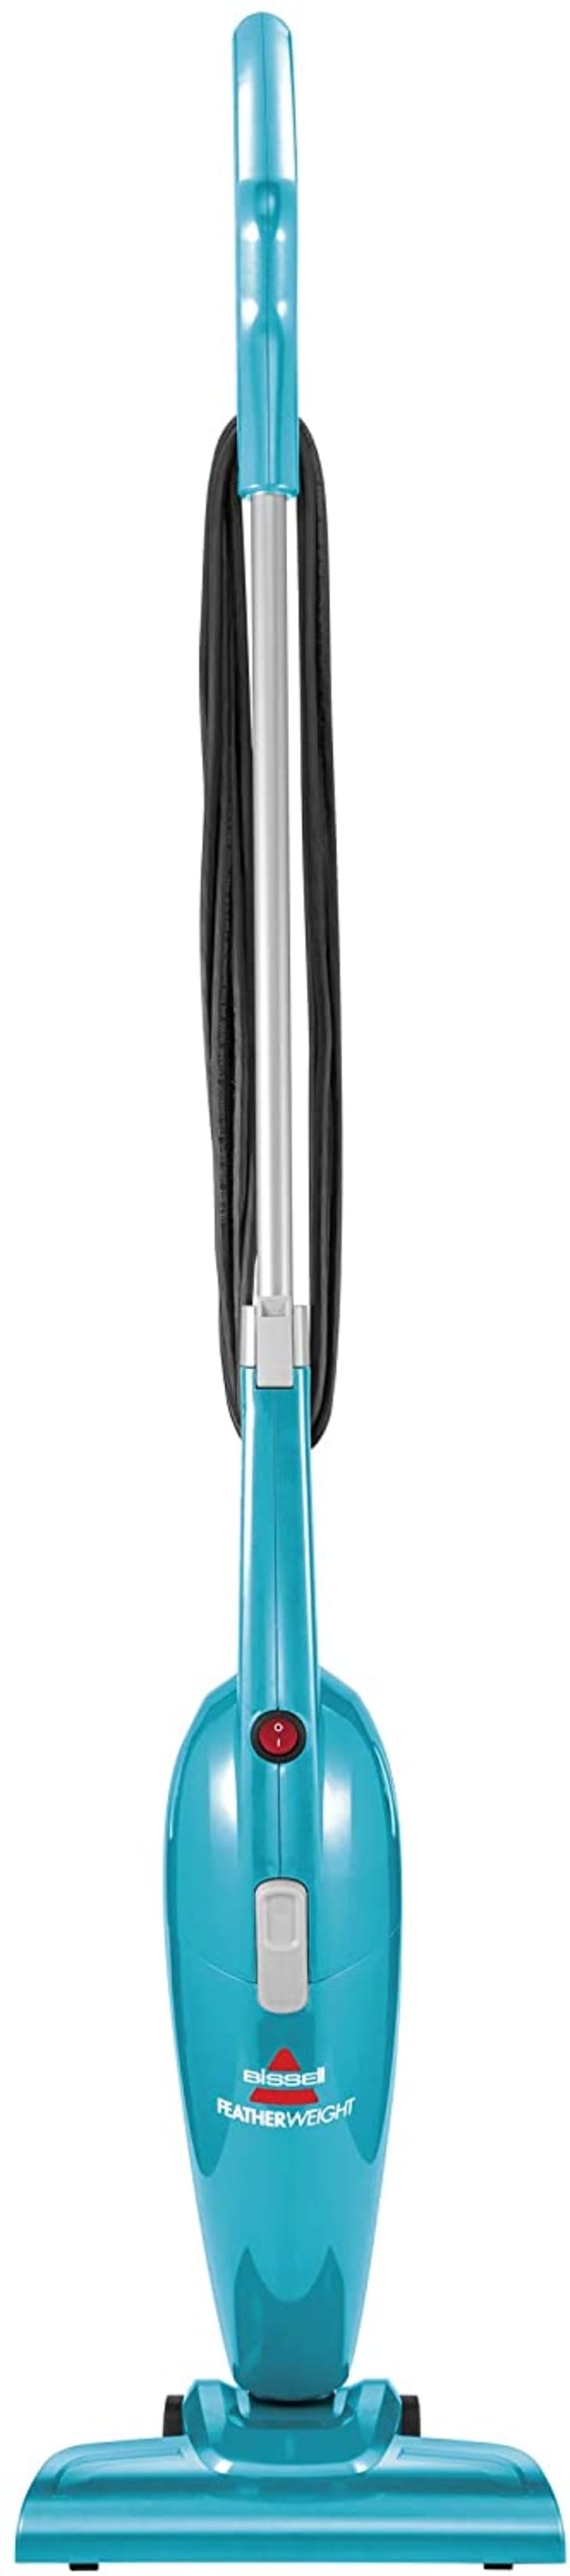 Product Image: Bissell Featherweight Stick Vacuum